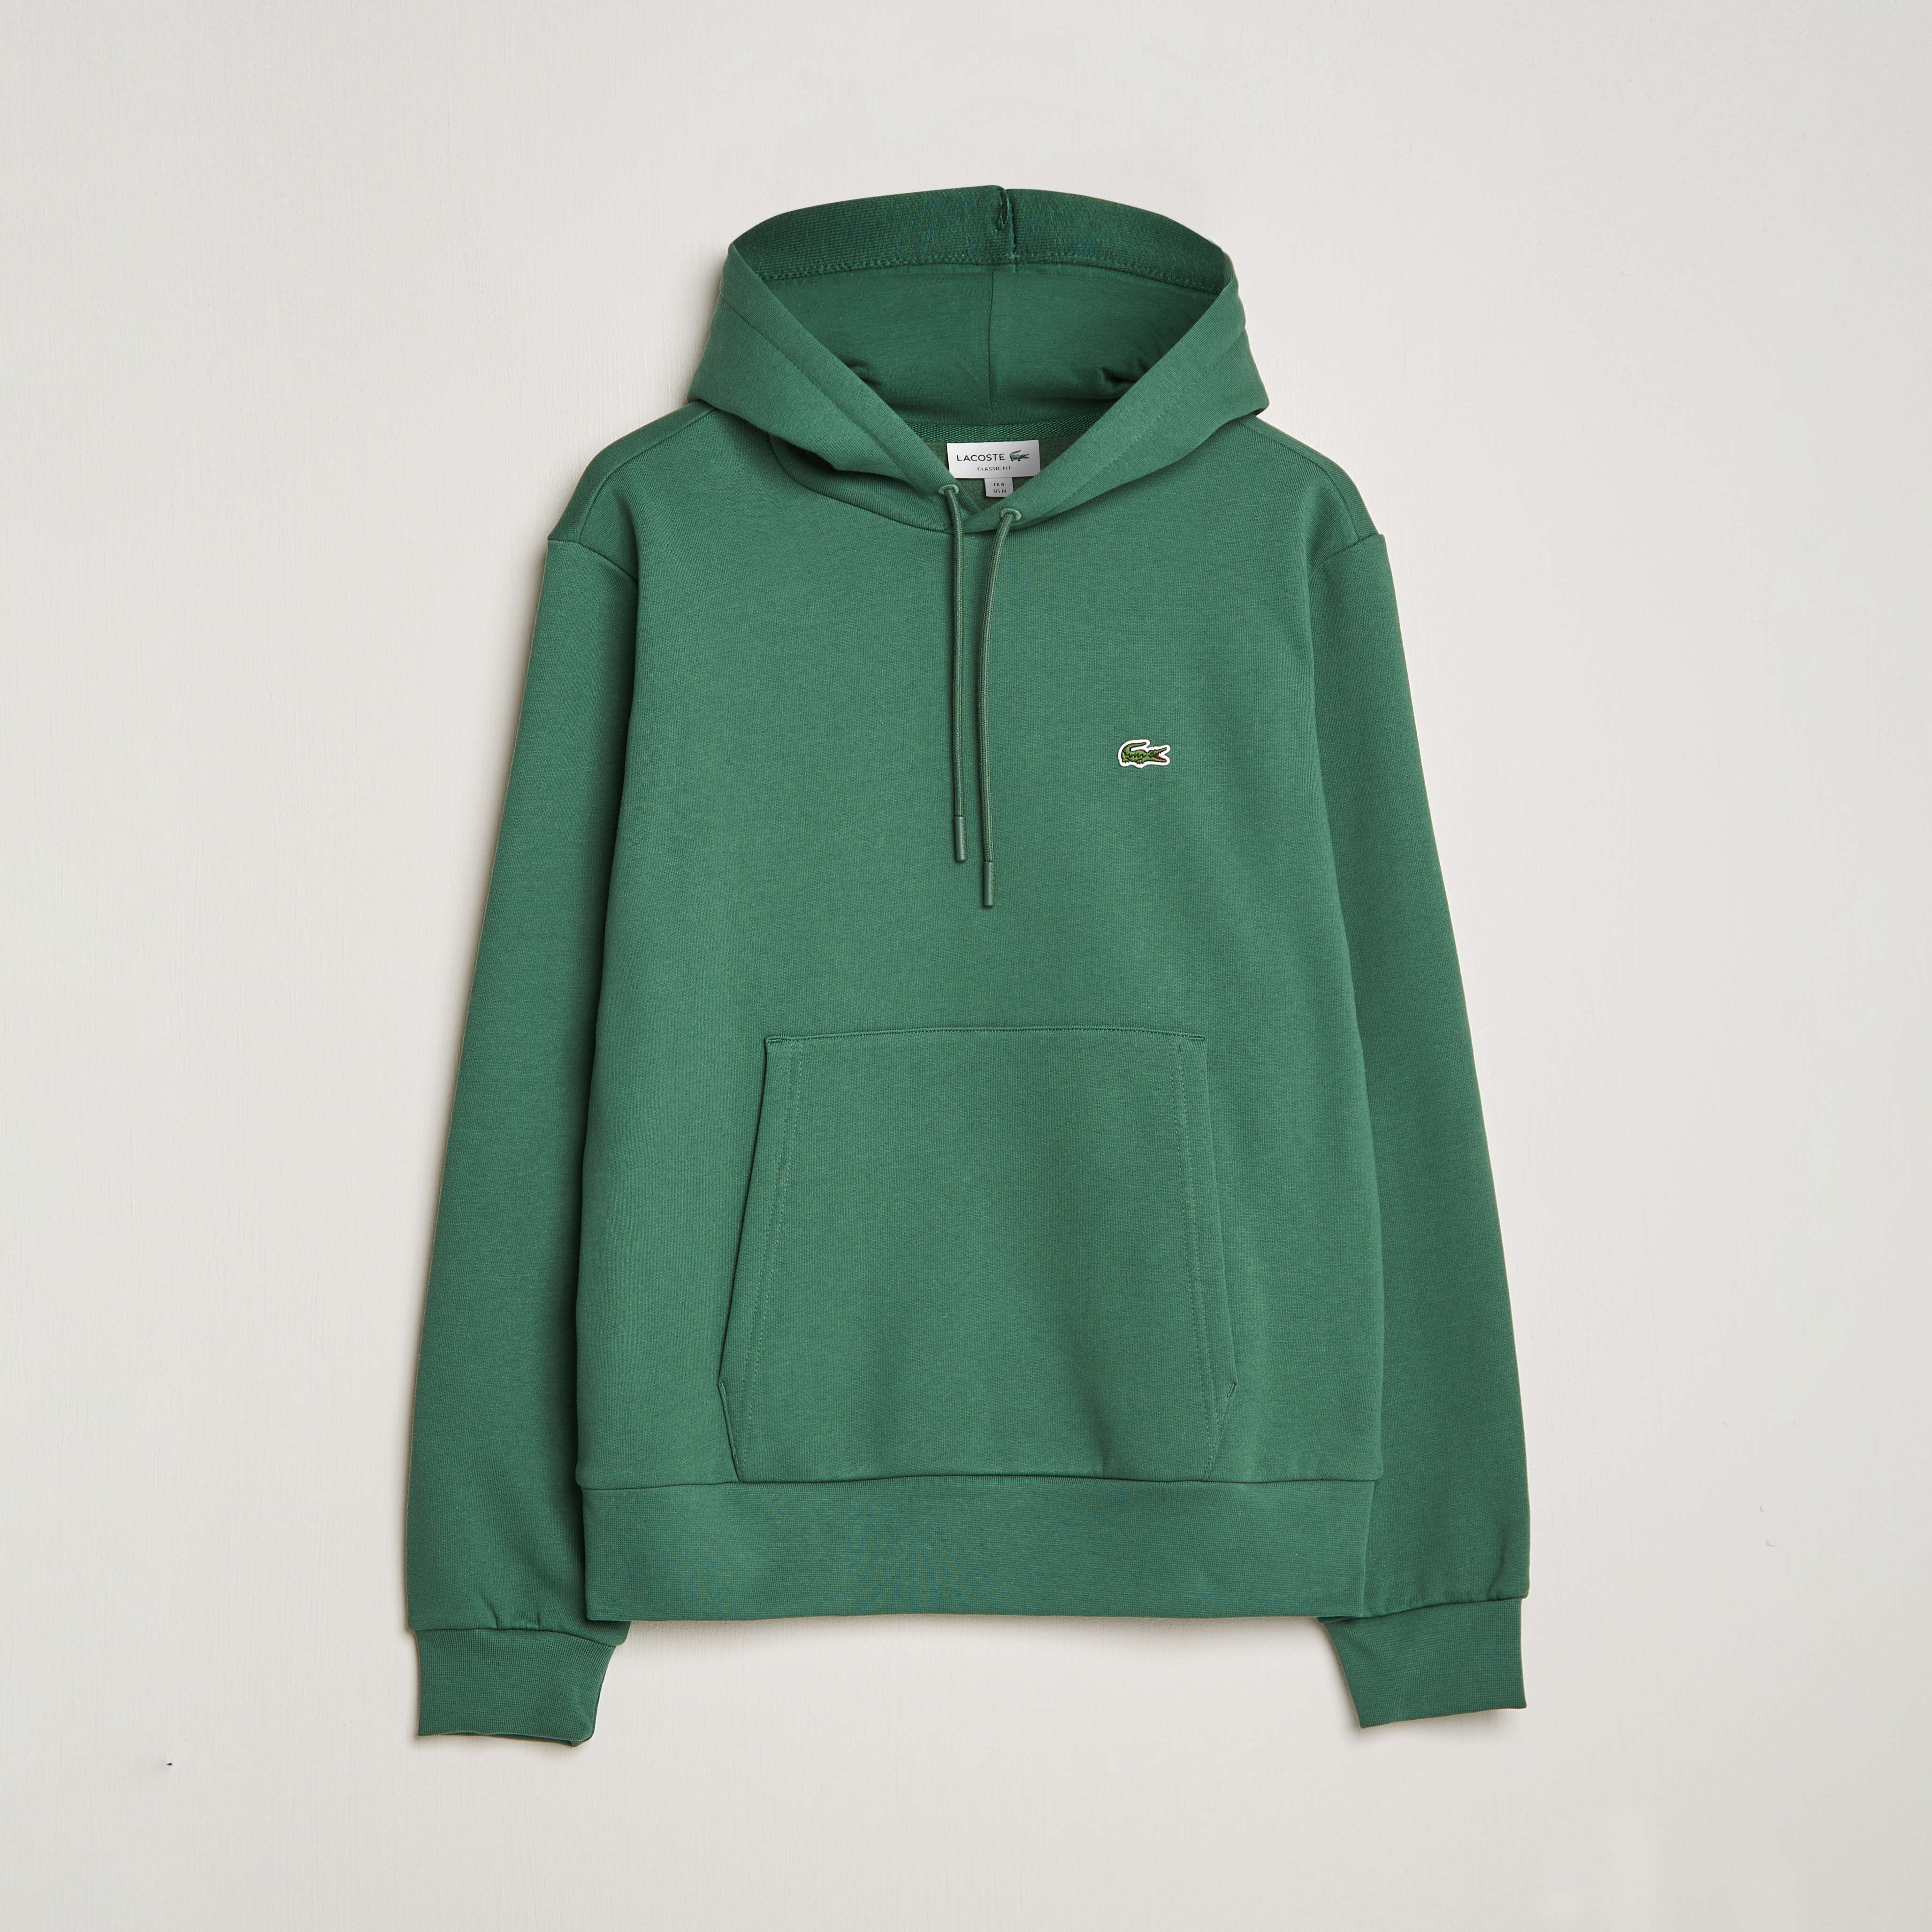 Hoodie Lacoste at Sequoia